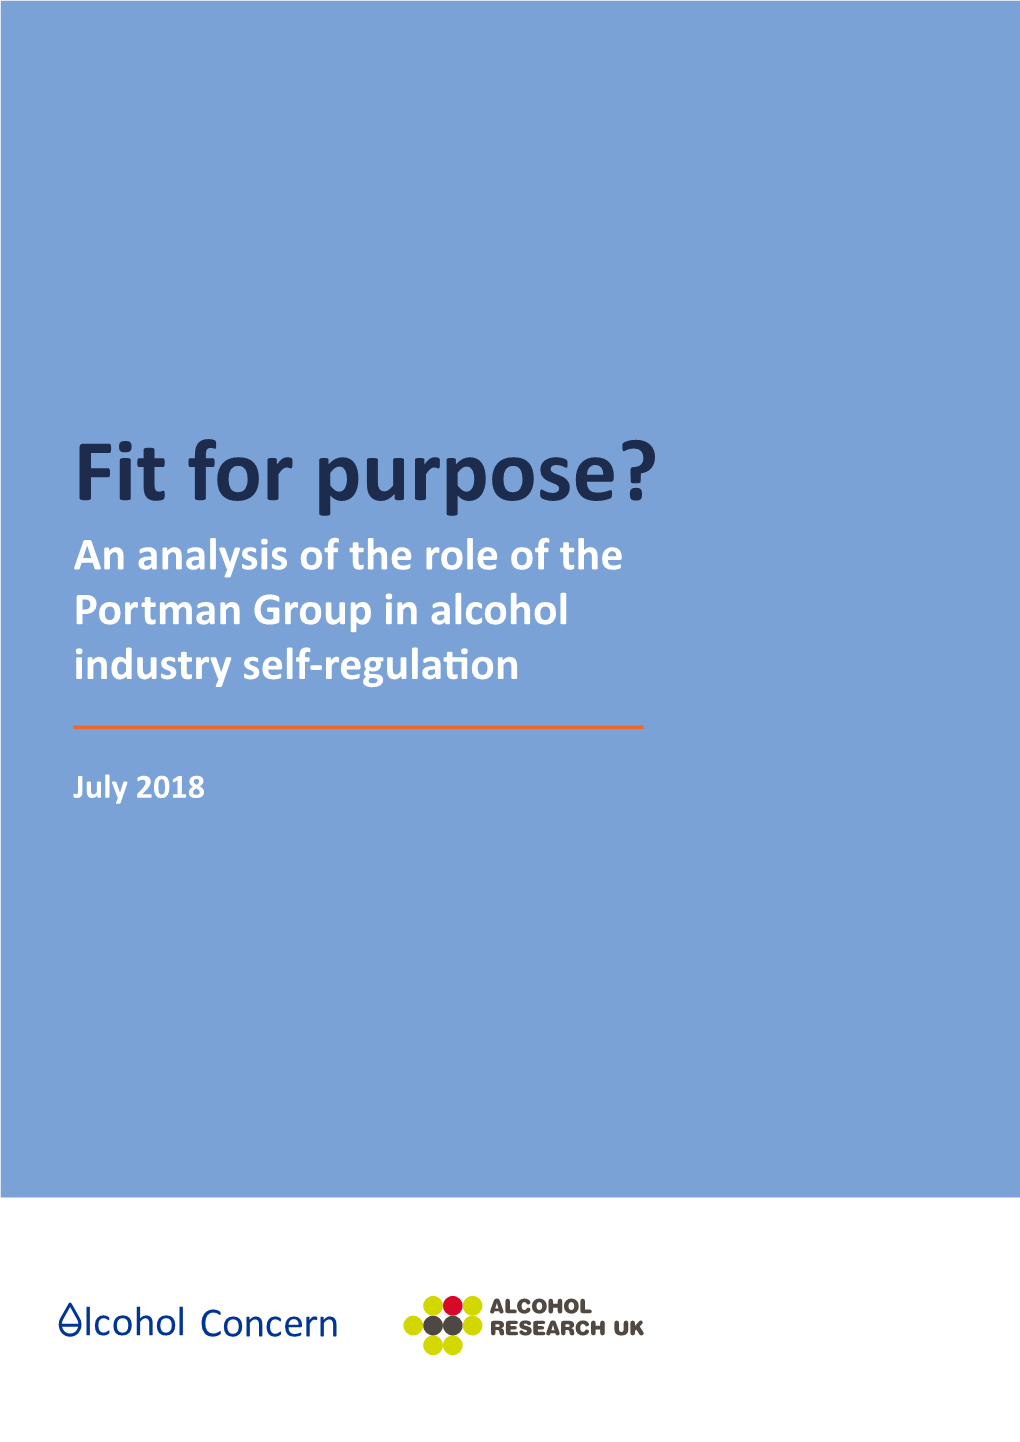 Fit for Purpose? an Analysis of the Role of the Portman Group in Alcohol Industry Self-Regulation